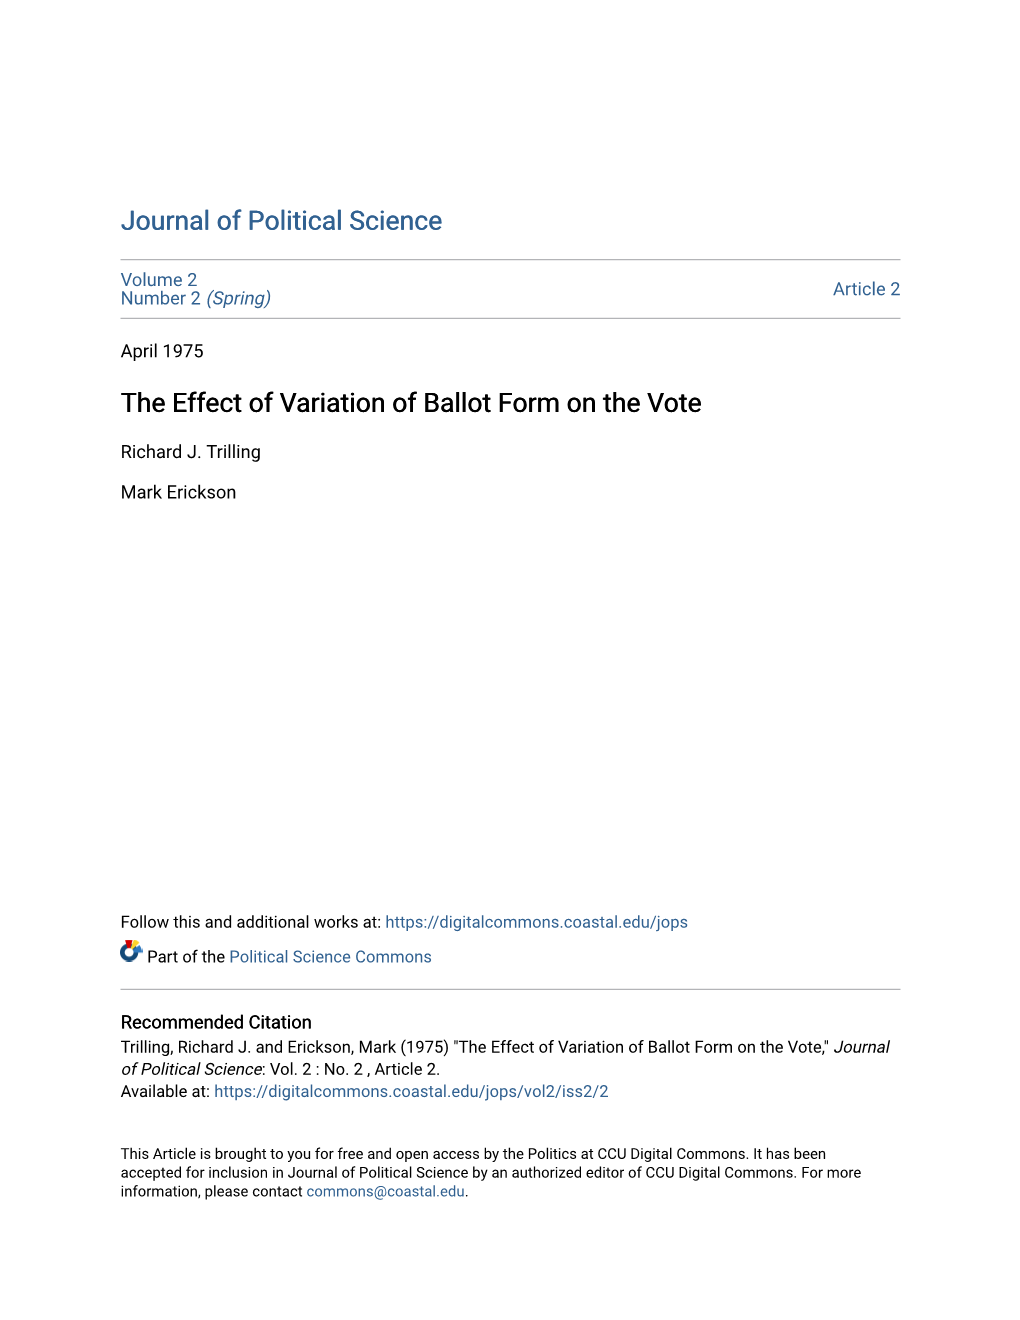 The Effect of Variation of Ballot Form on the Vote